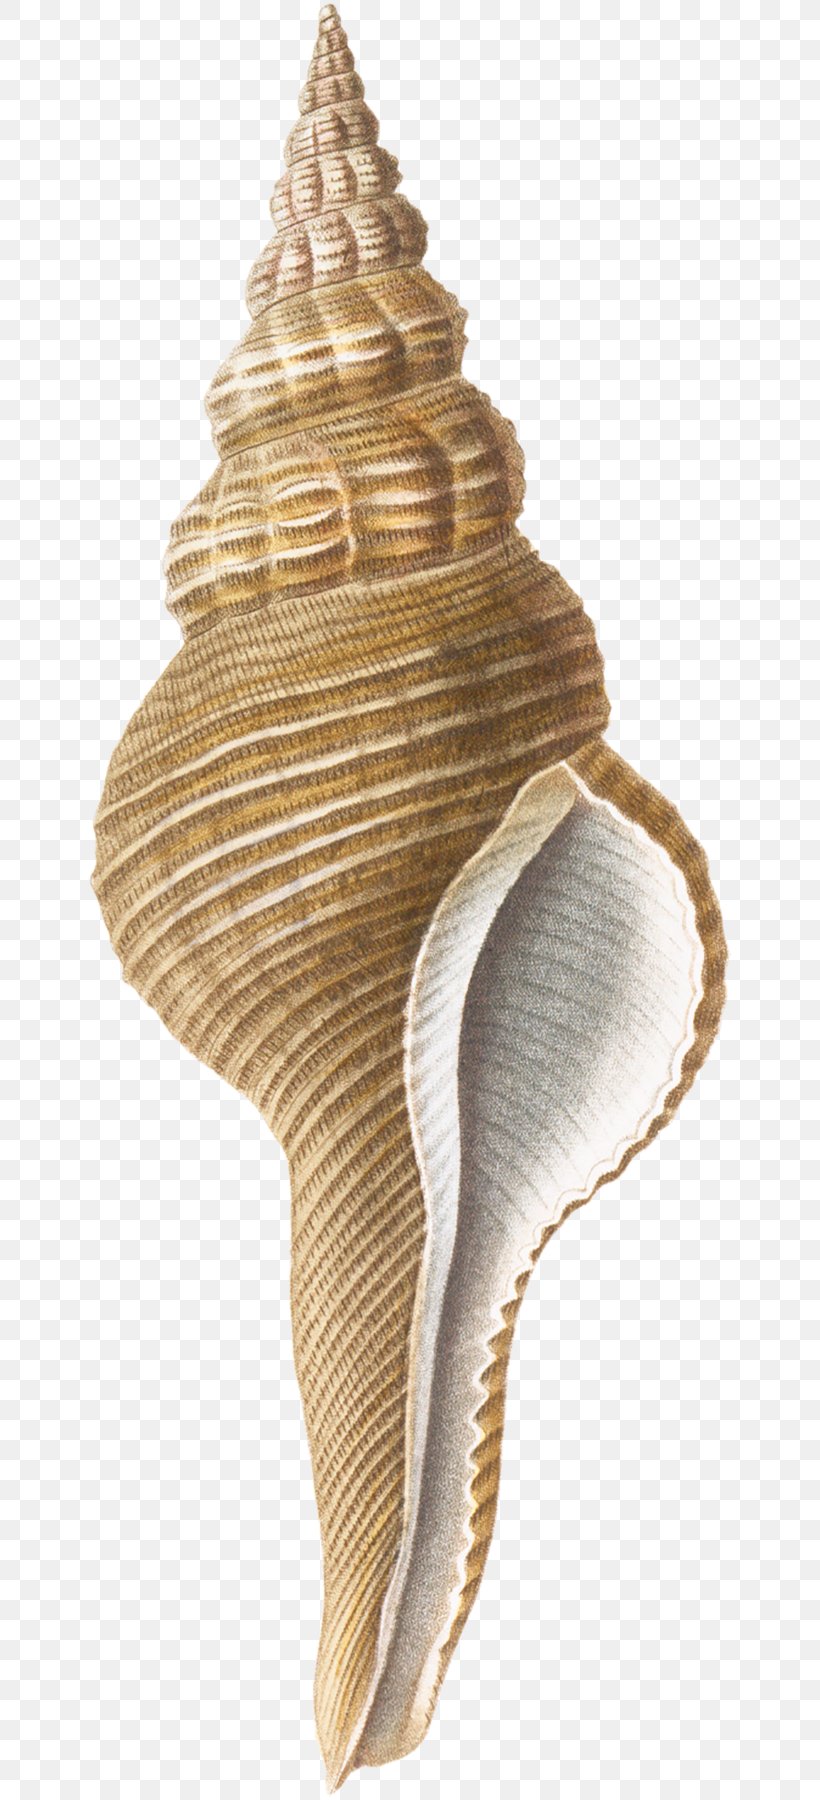 Ice Cream Cones Conchology Trumpet, PNG, 651x1800px, Ice Cream Cones, Bivalve, Conch, Conchology, Cone Download Free